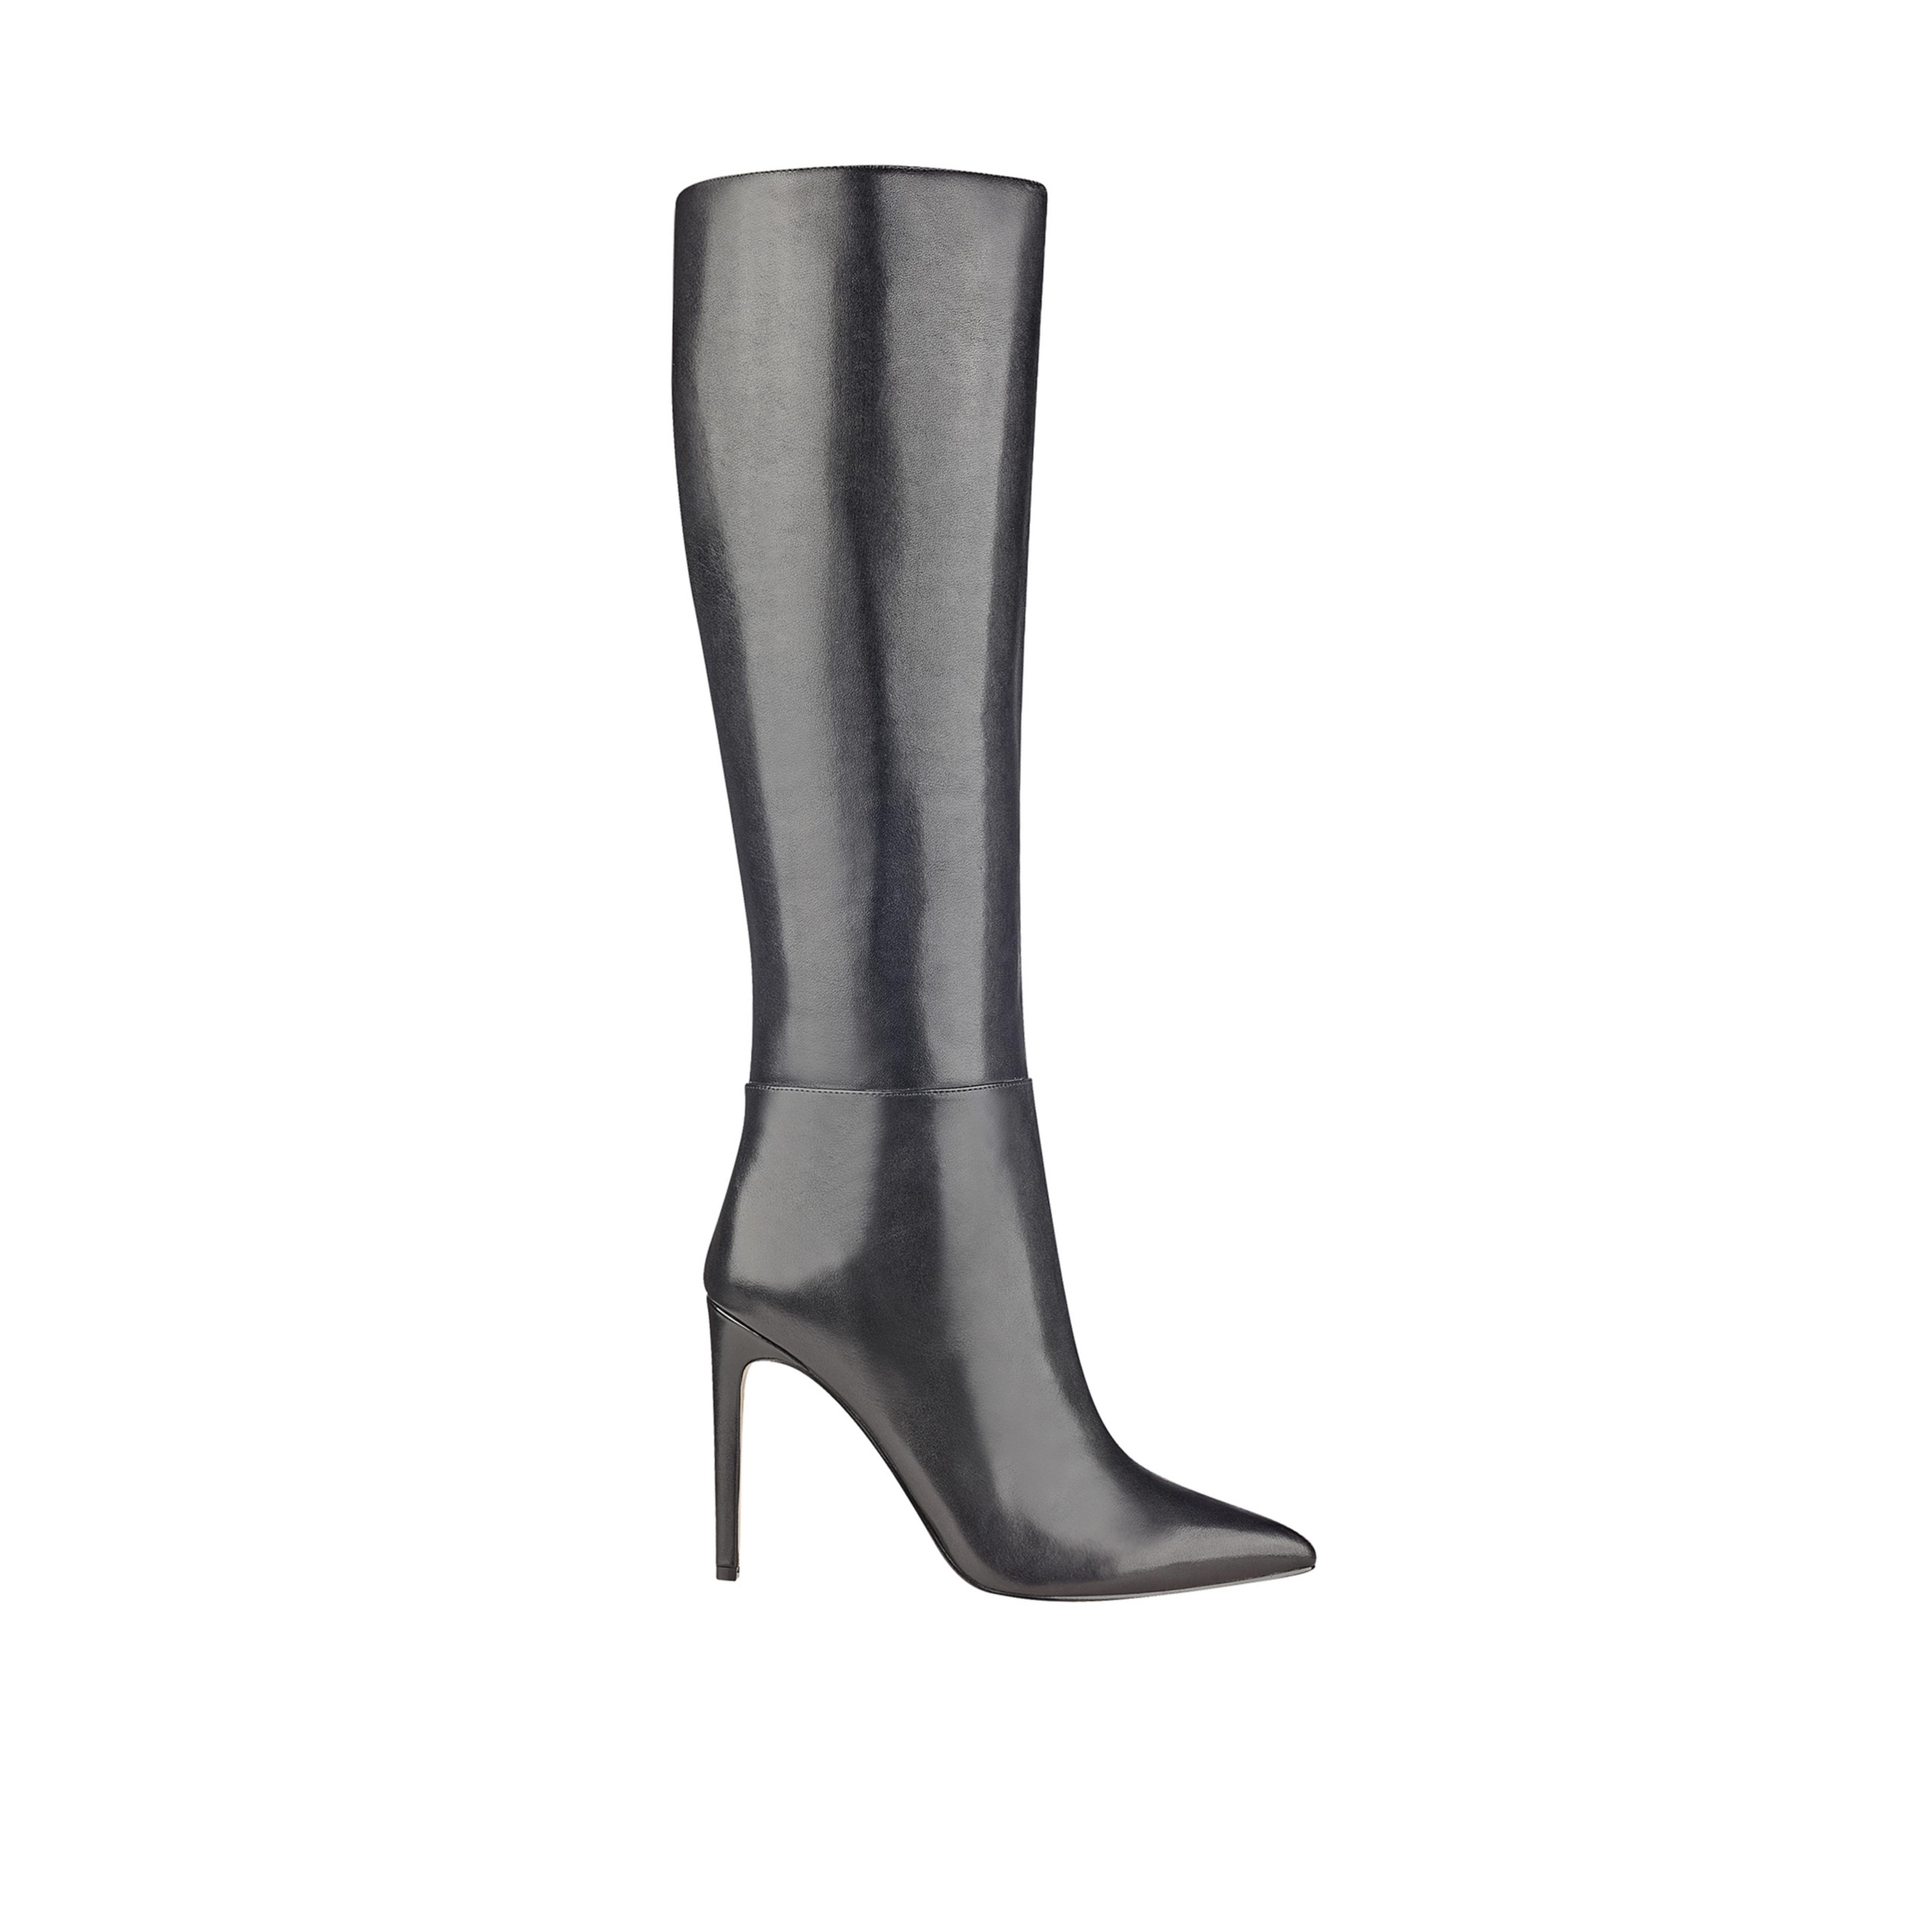 GUESS Womens lilly Closed Toe Knee High Fashion Boots, Black leather ...